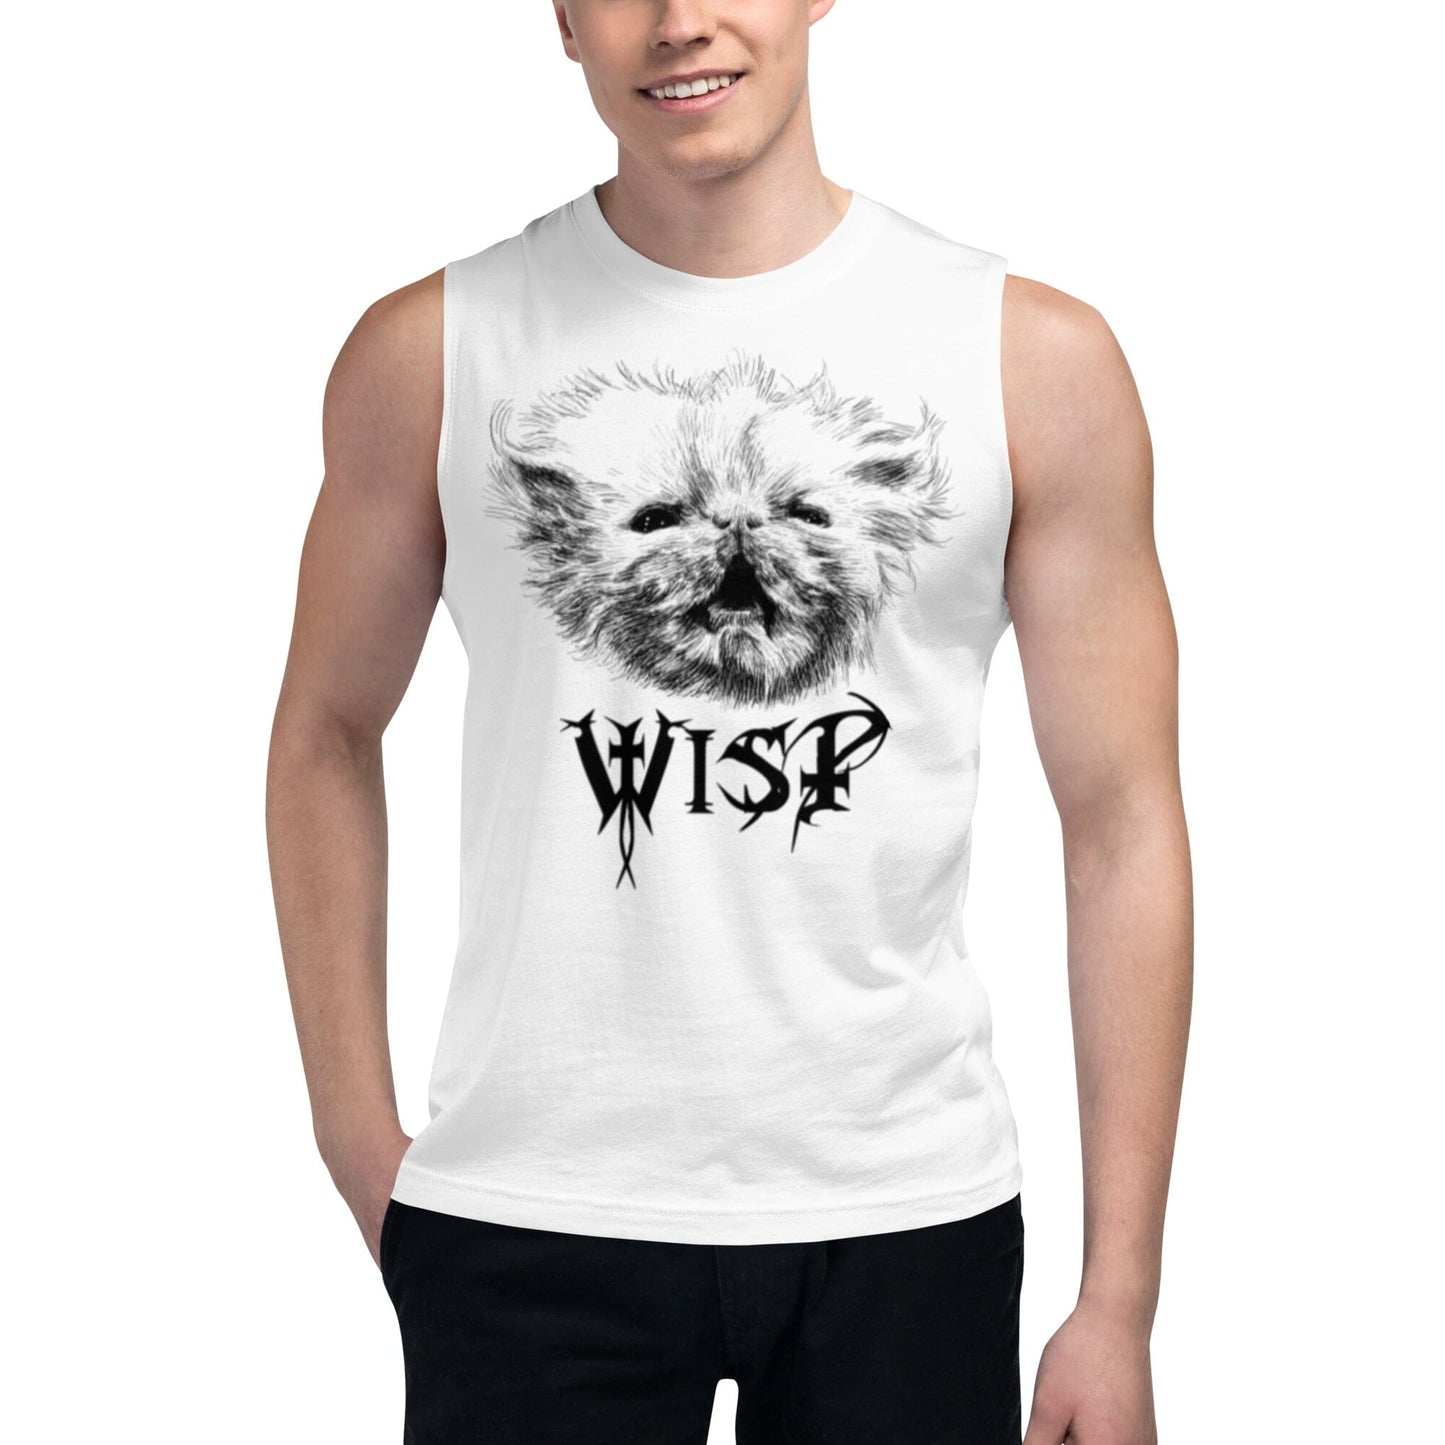 Metal Wisp Muscle Shirt [Unfoiled] (All net proceeds go to Rags to Riches Animal Rescue) JoyousJoyfulJoyness S 